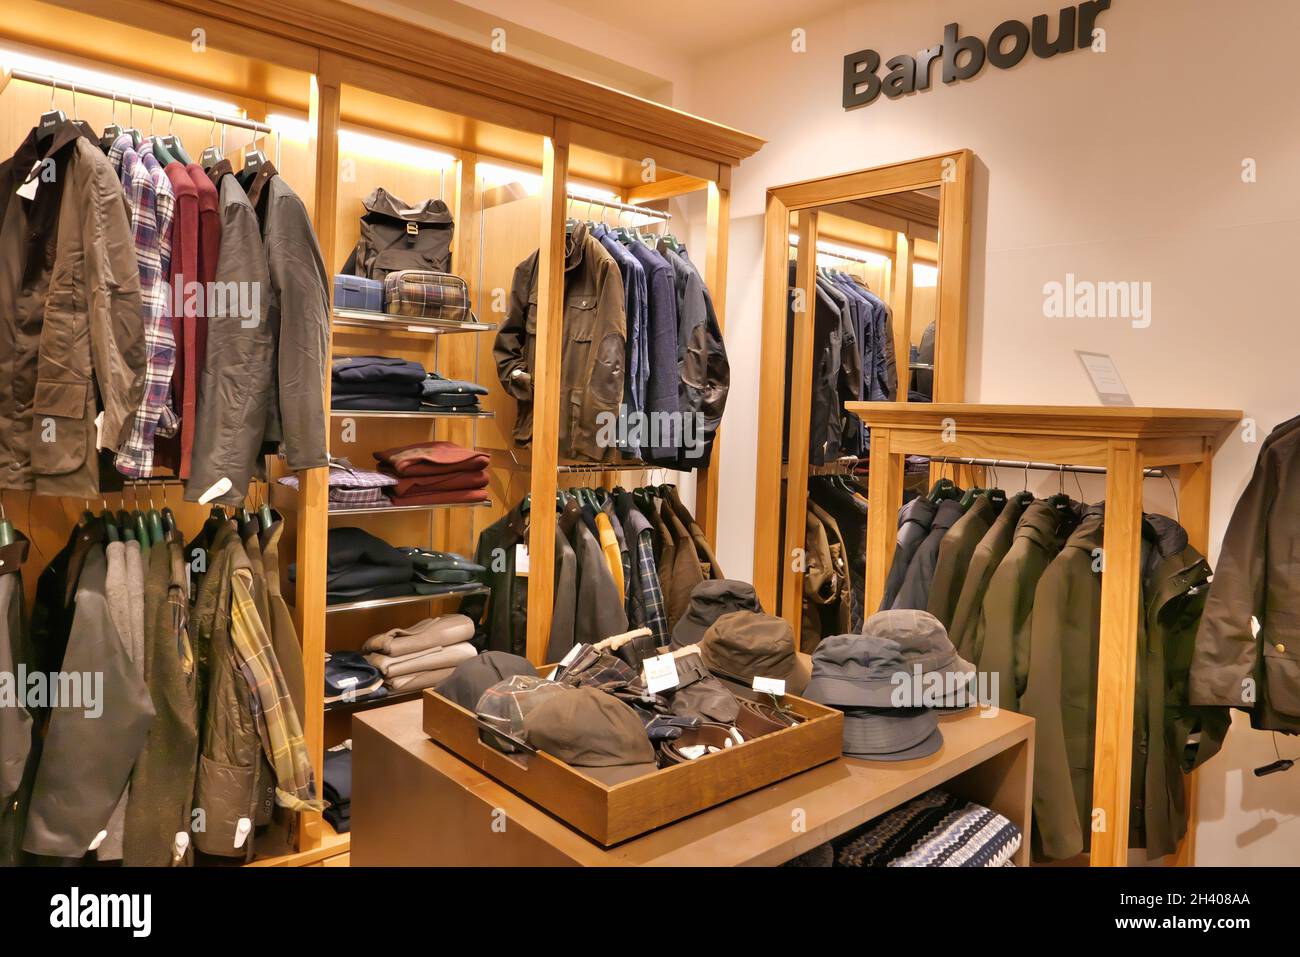 Barbour Clothing High Resolution Stock Photography and Images - Alamy